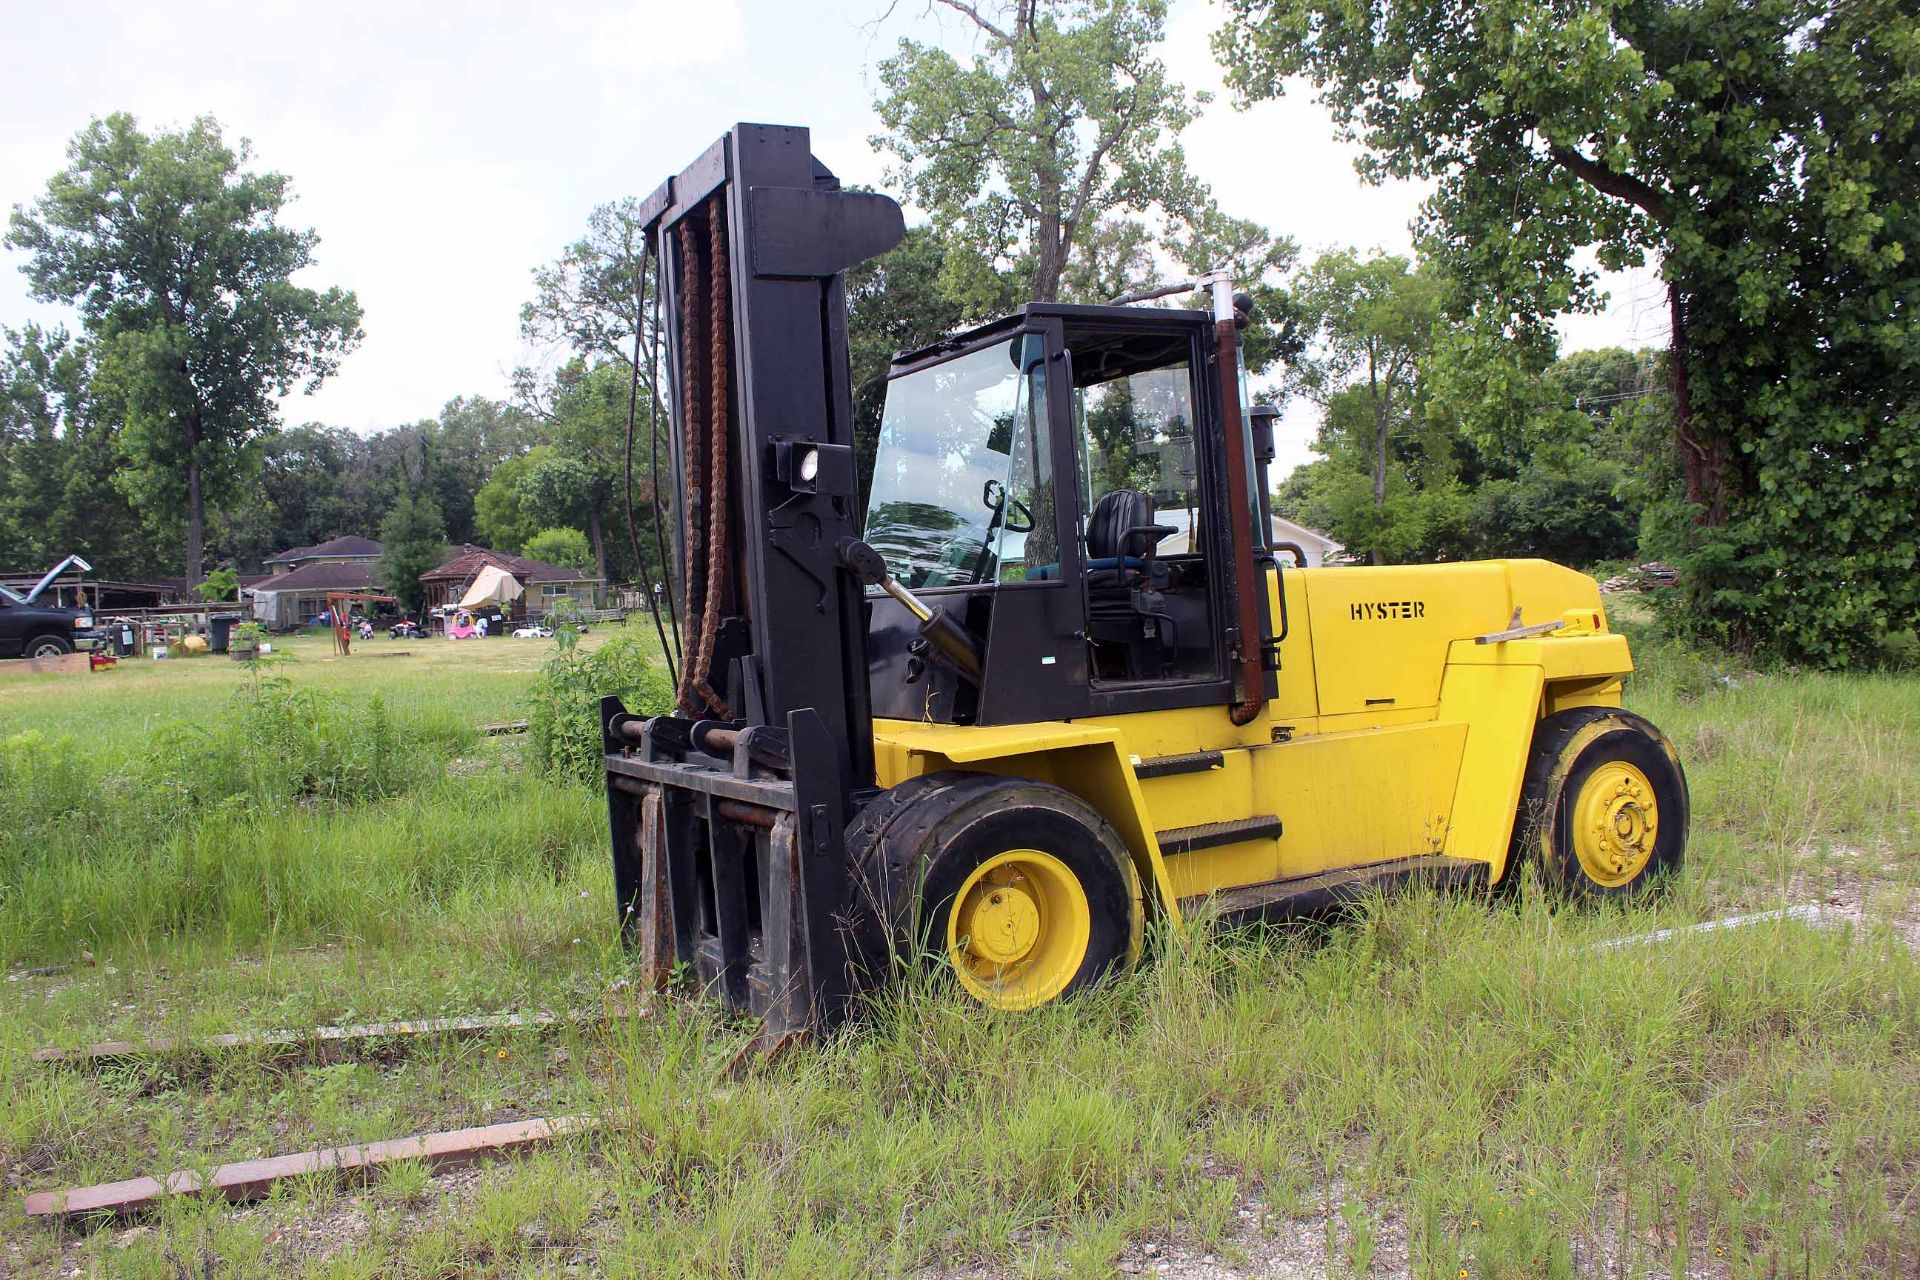 FORKLIFT, HYSTER 30,000 LB. BASE CAP. MDL. H300XL, 29,000 lb. cap. as equipped, diesel, 2-stage